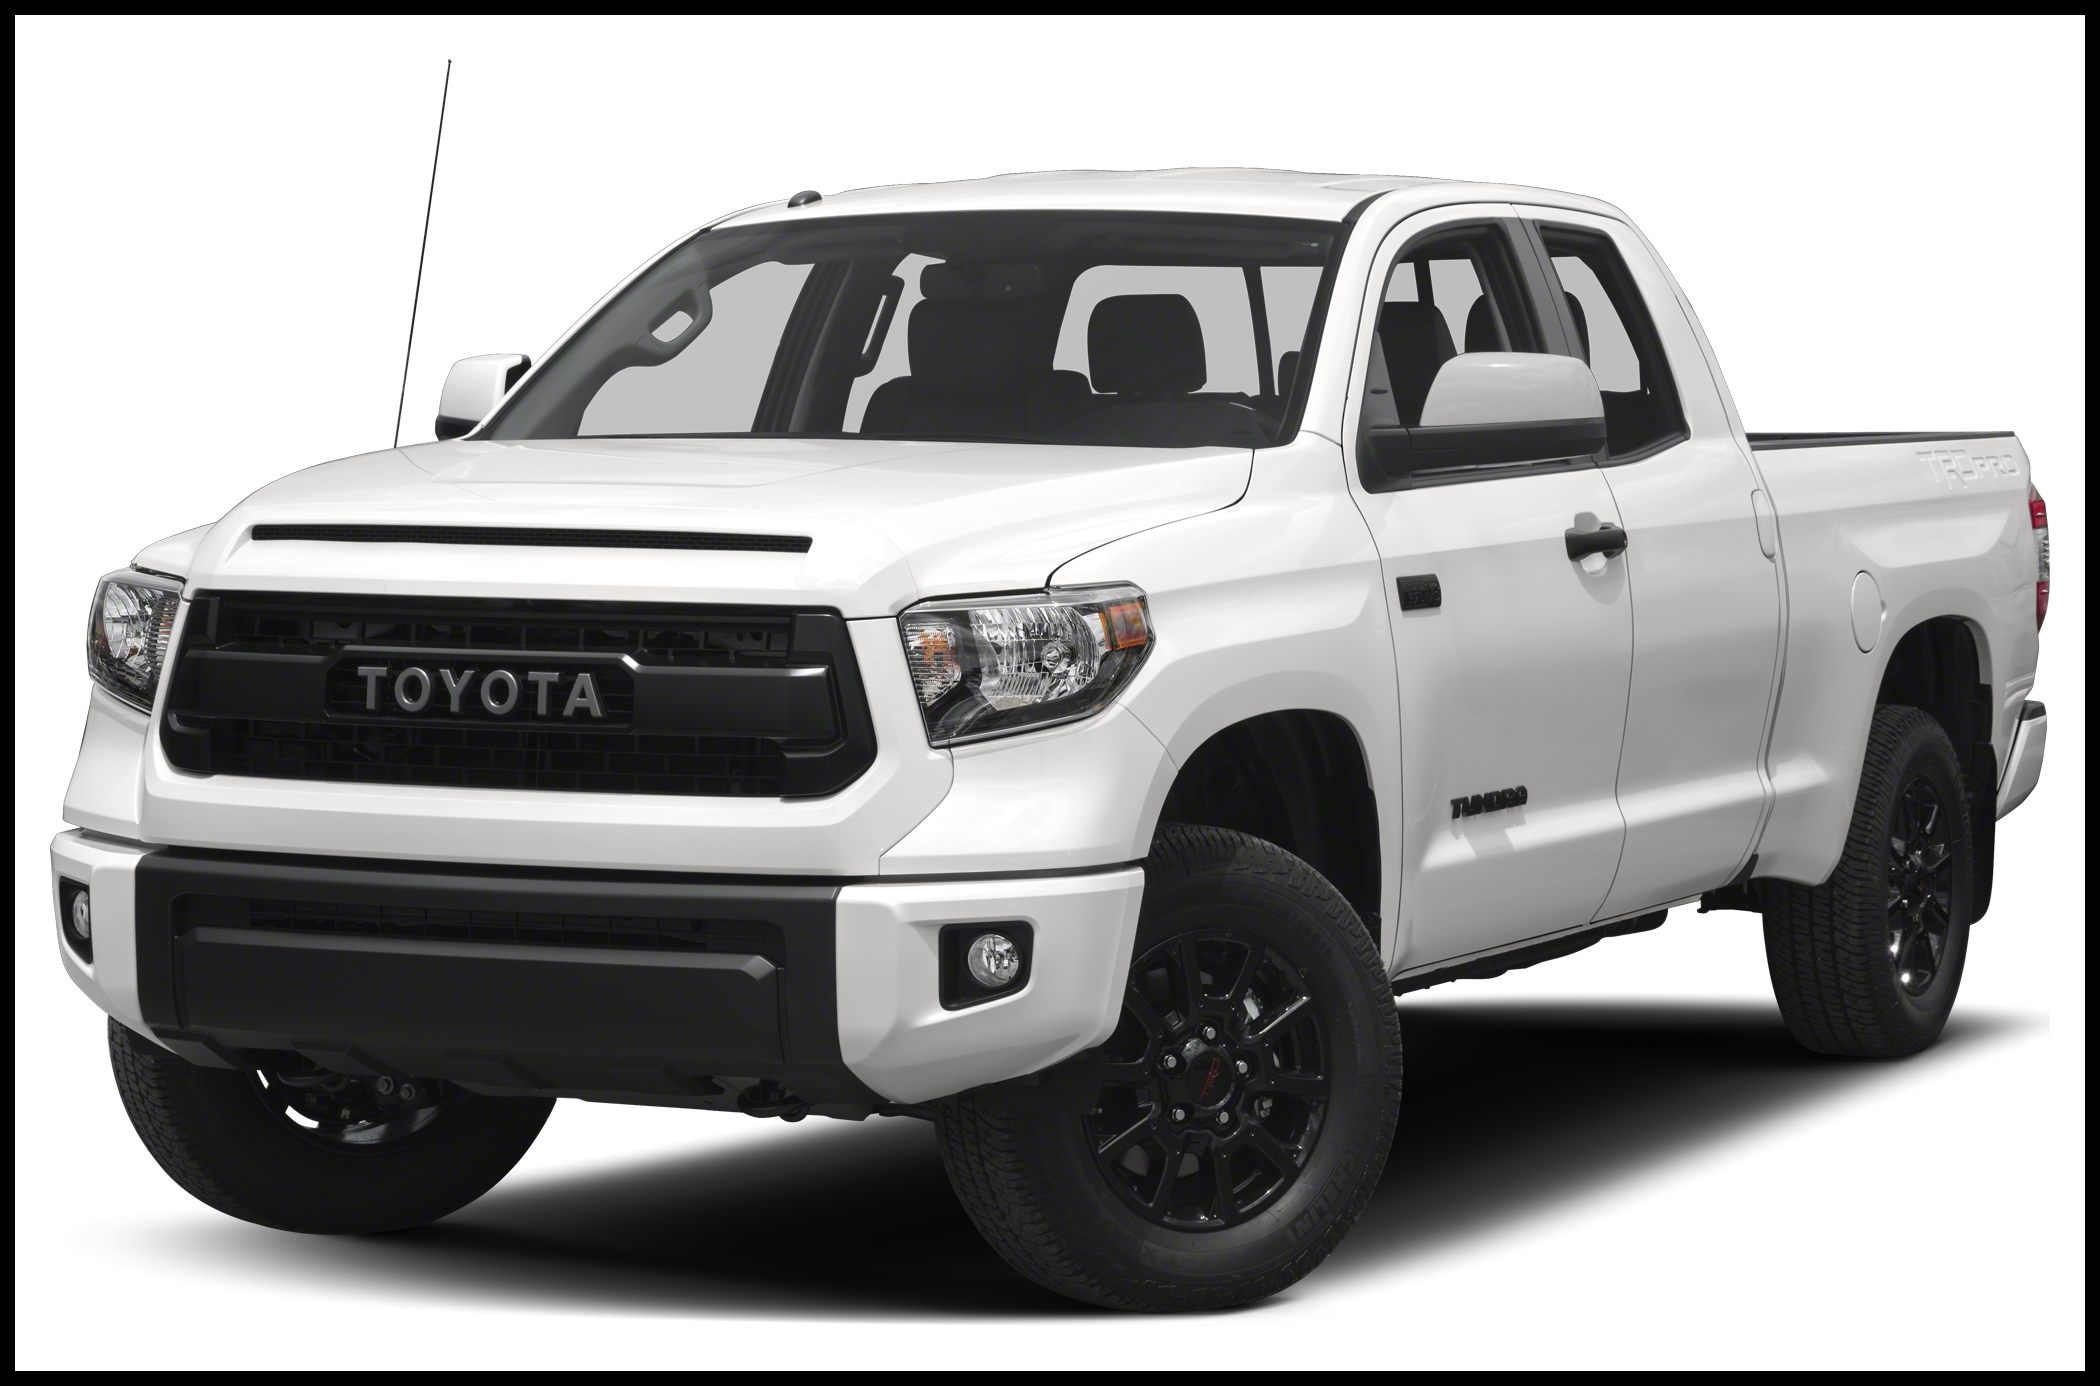 2016 Toyota Tundra TRD Pro 5 7L V8 4x4 Double Cab 6 6 ft box 145 7 in WB Pricing and Options